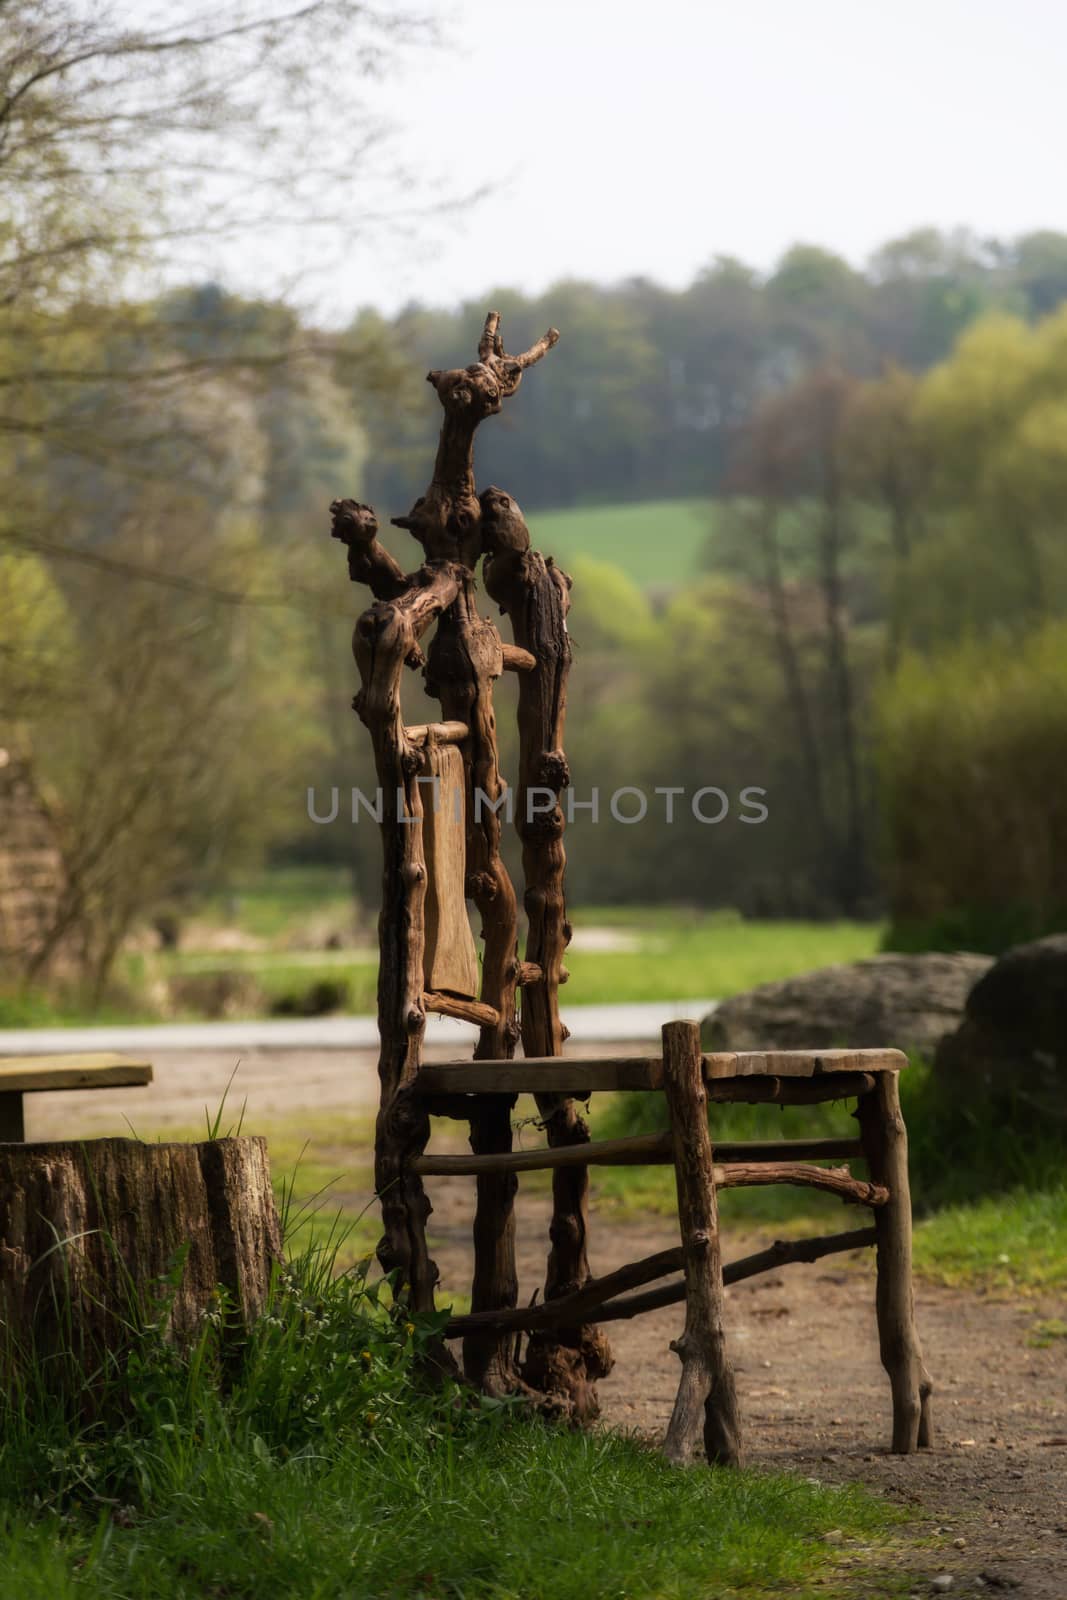 Handmade wooden chair in the middle of nature by sandra_fotodesign